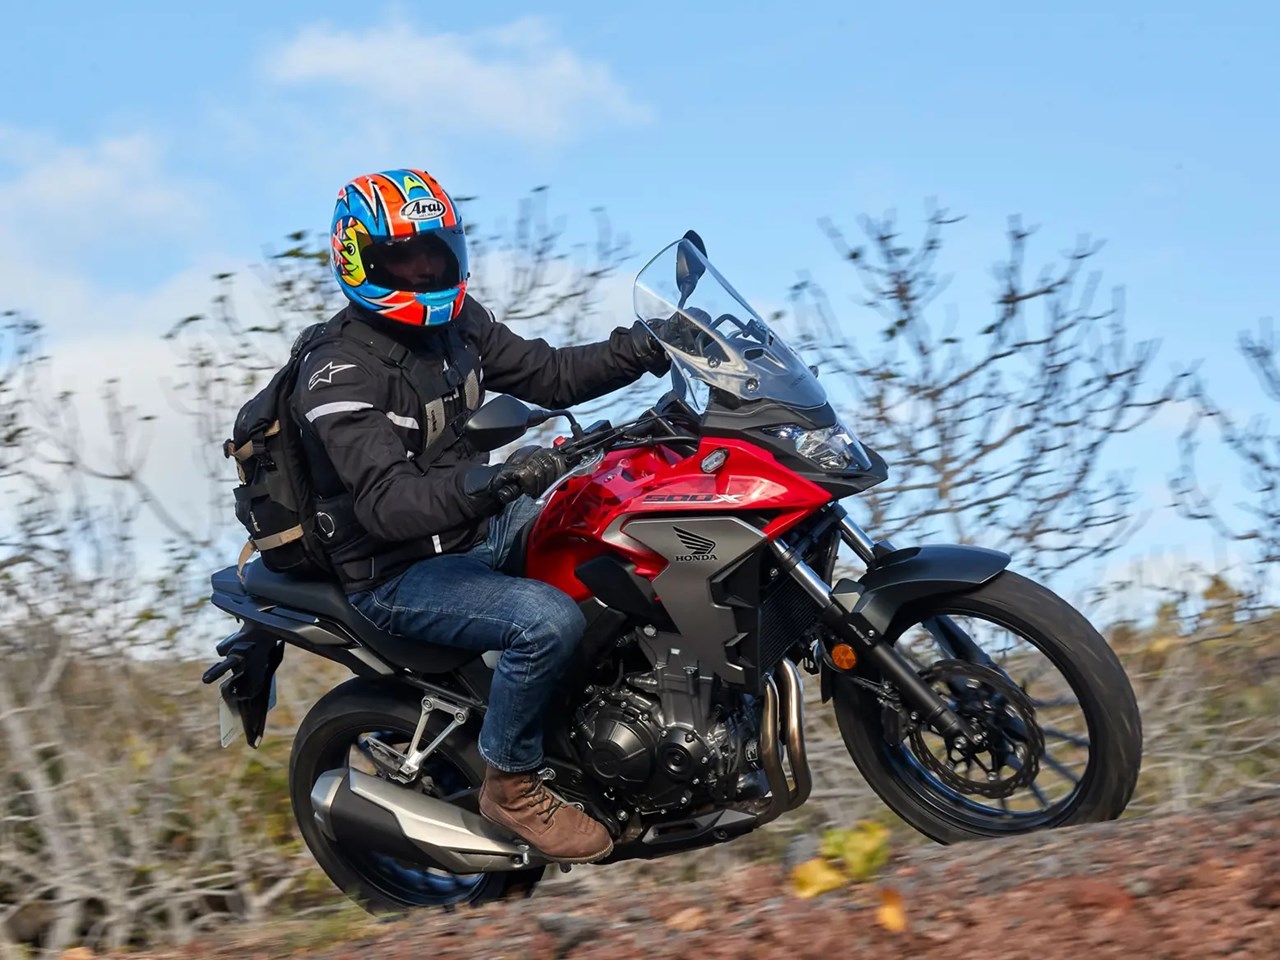 Honda CB500X: The BEST accessories for your motorcycle 